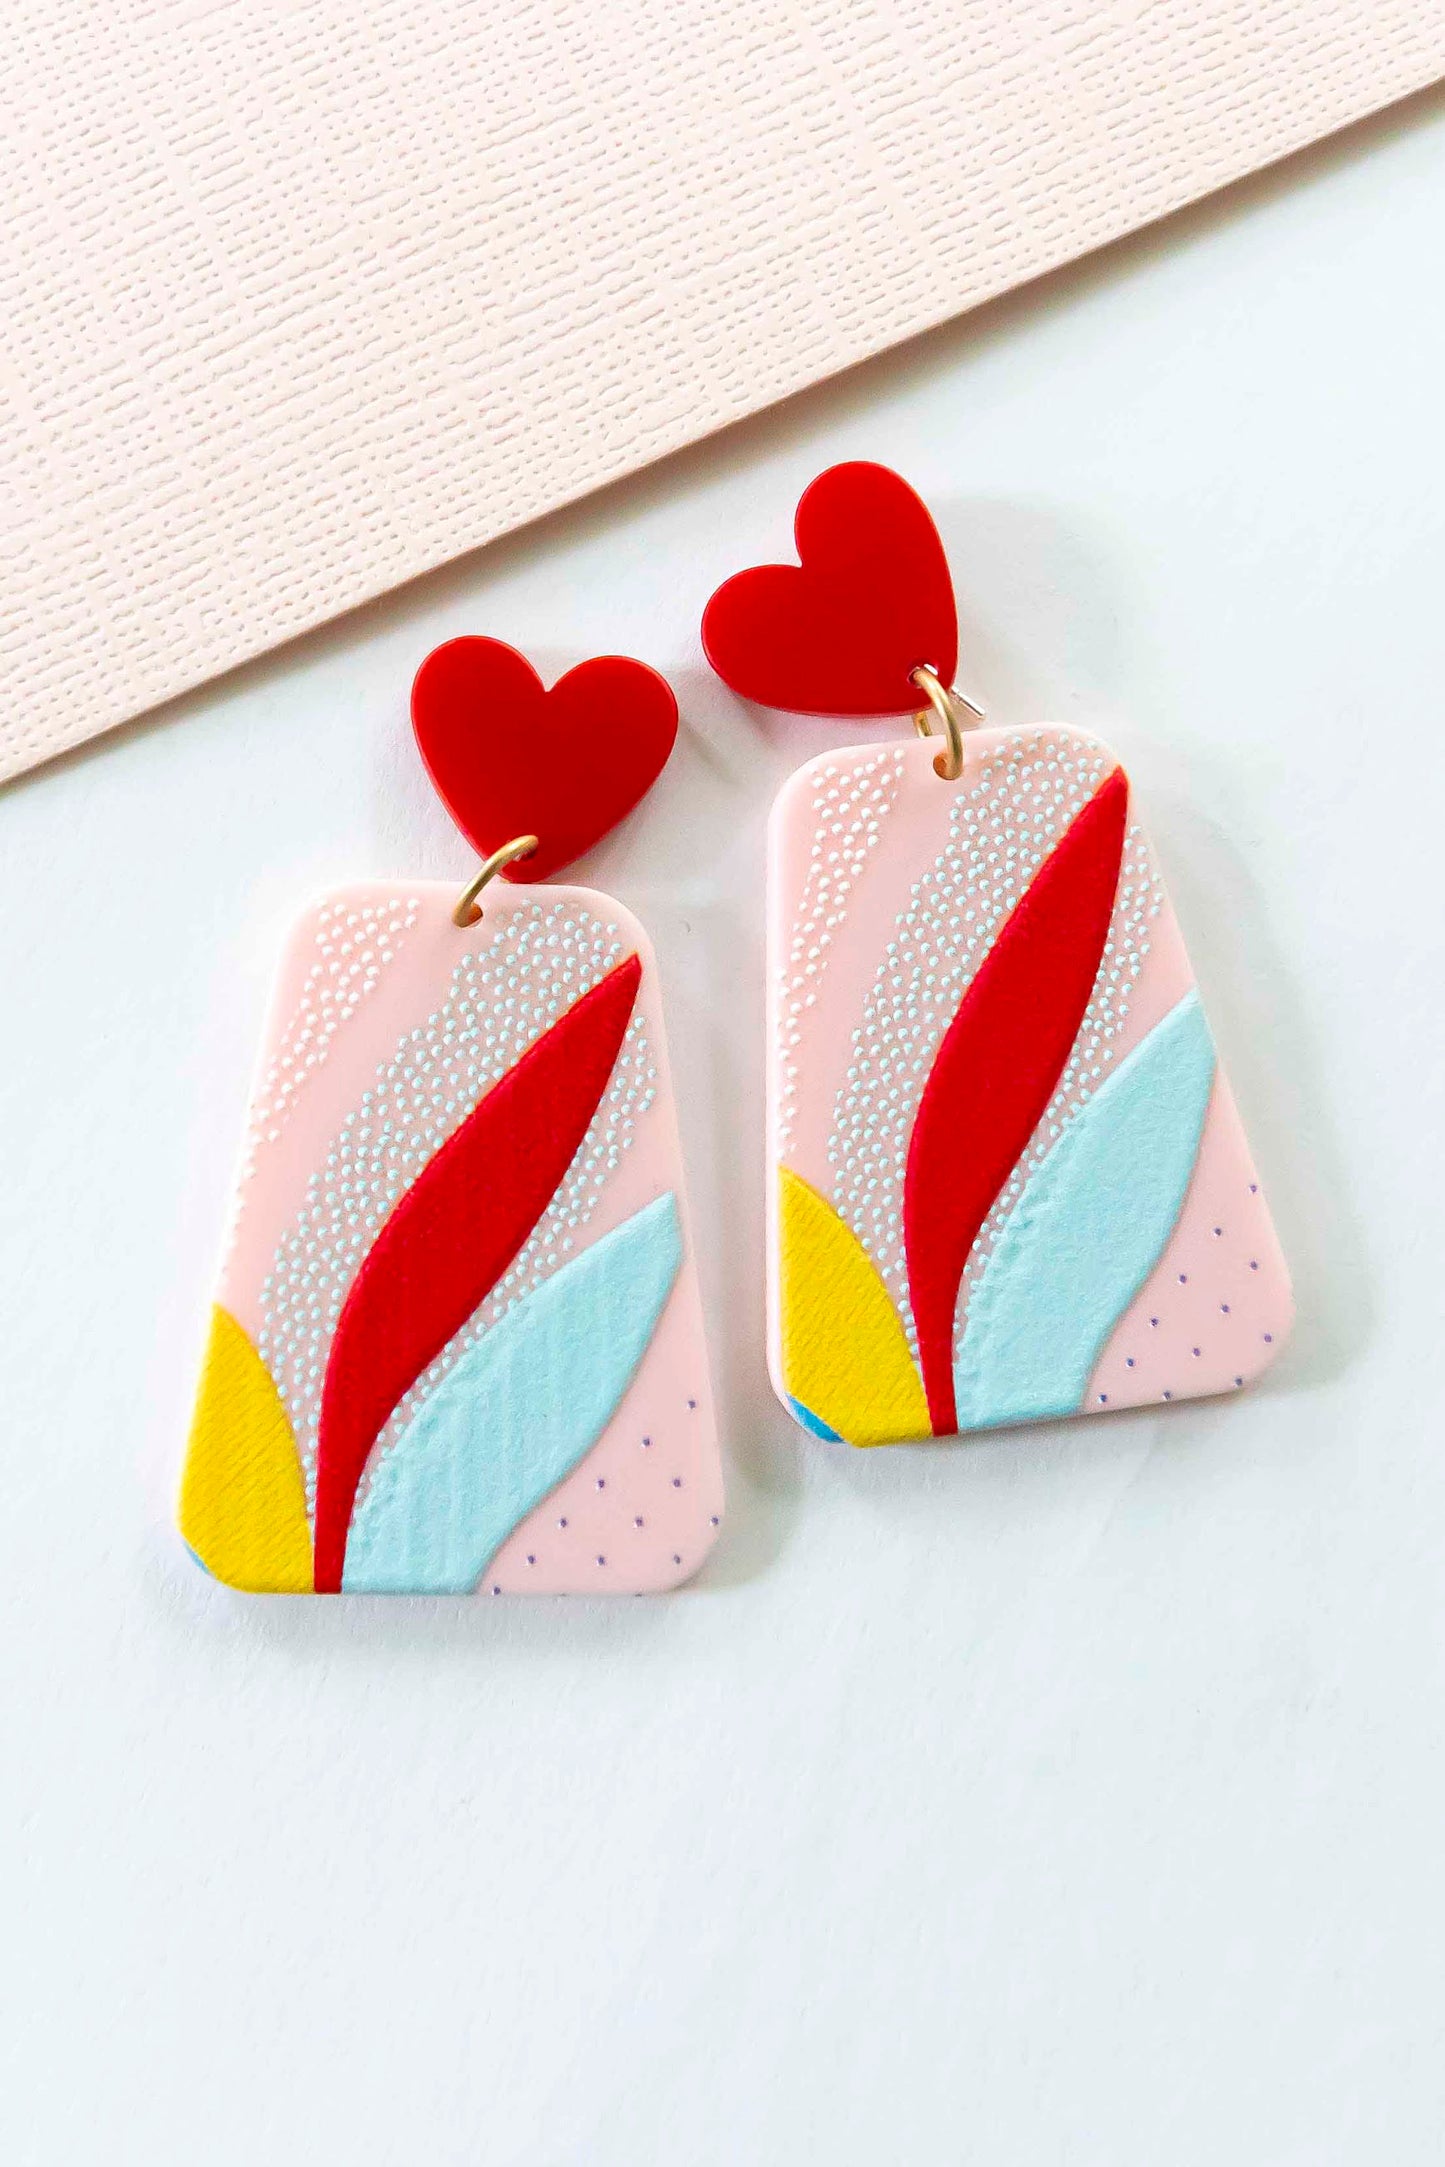 Load image into Gallery viewer, Emma Clay Drop Earrings | 2 Colors Pink and Yellow | Art Deco Clay Earrings | Colorful Artistic Drop Earrings | Modern Chic Style
